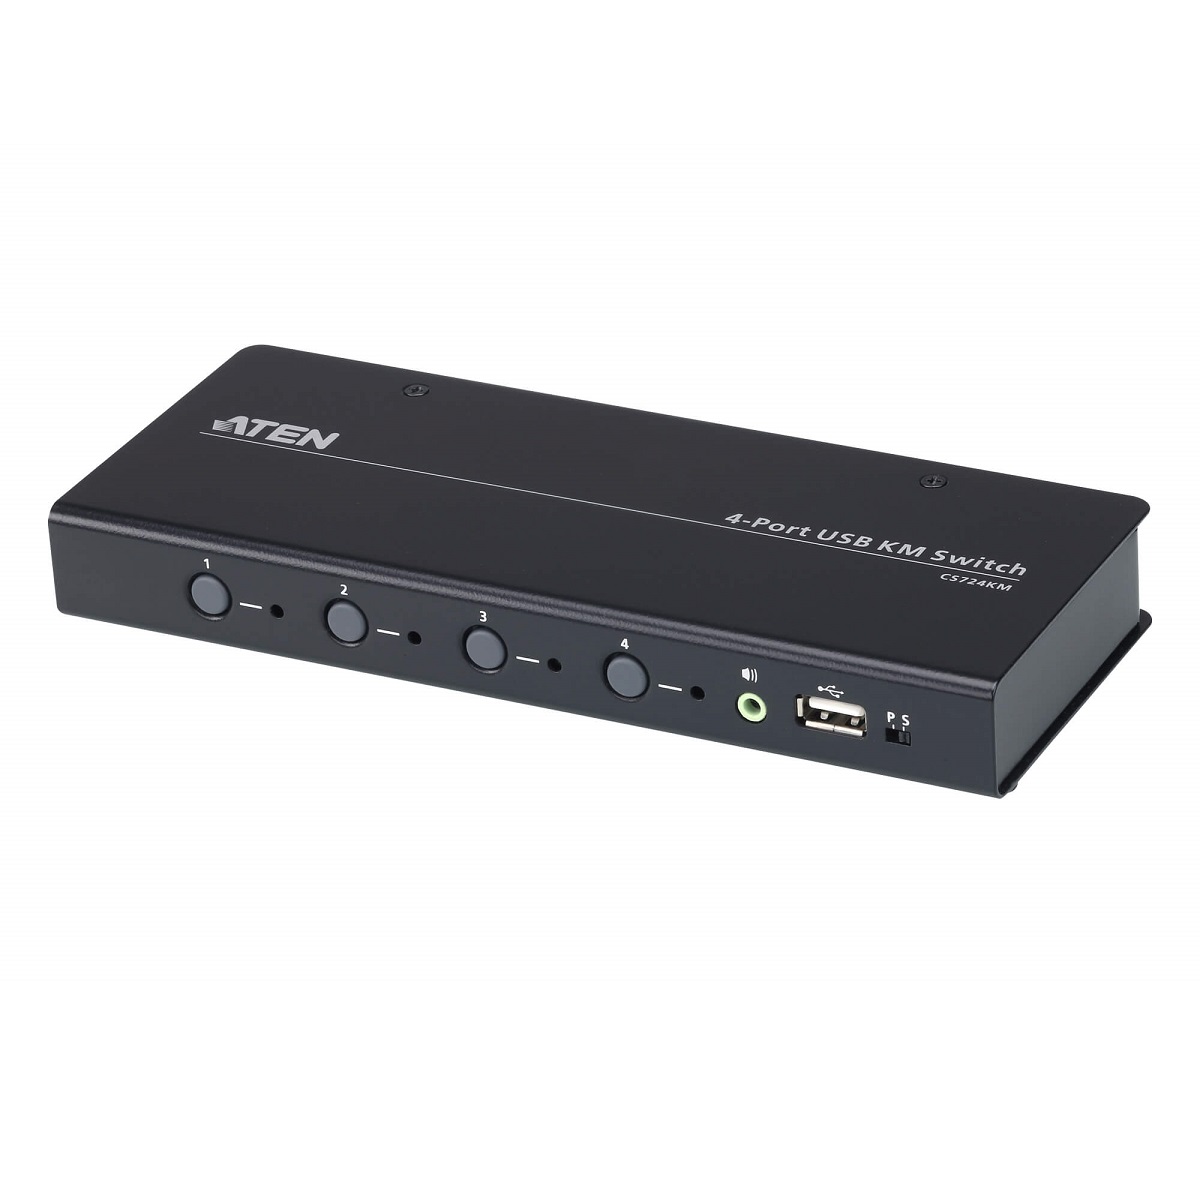 Aten 4 Port USB Boundless KM Switch 4 USB 2.0 B to USB 2.0 A cables included